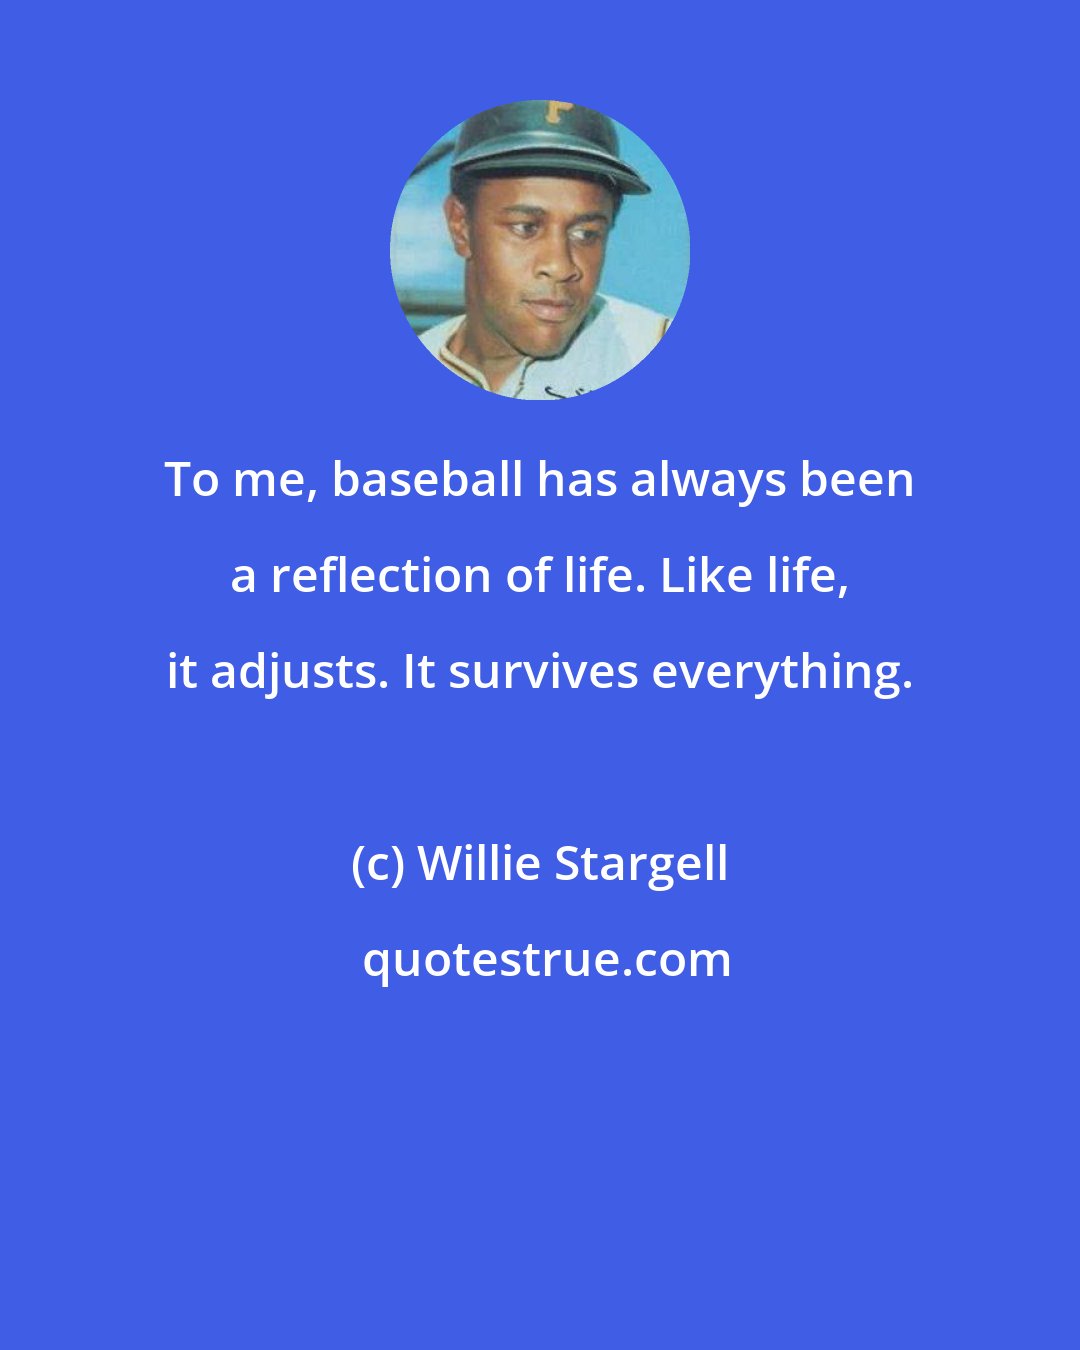 Willie Stargell: To me, baseball has always been a reflection of life. Like life, it adjusts. It survives everything.